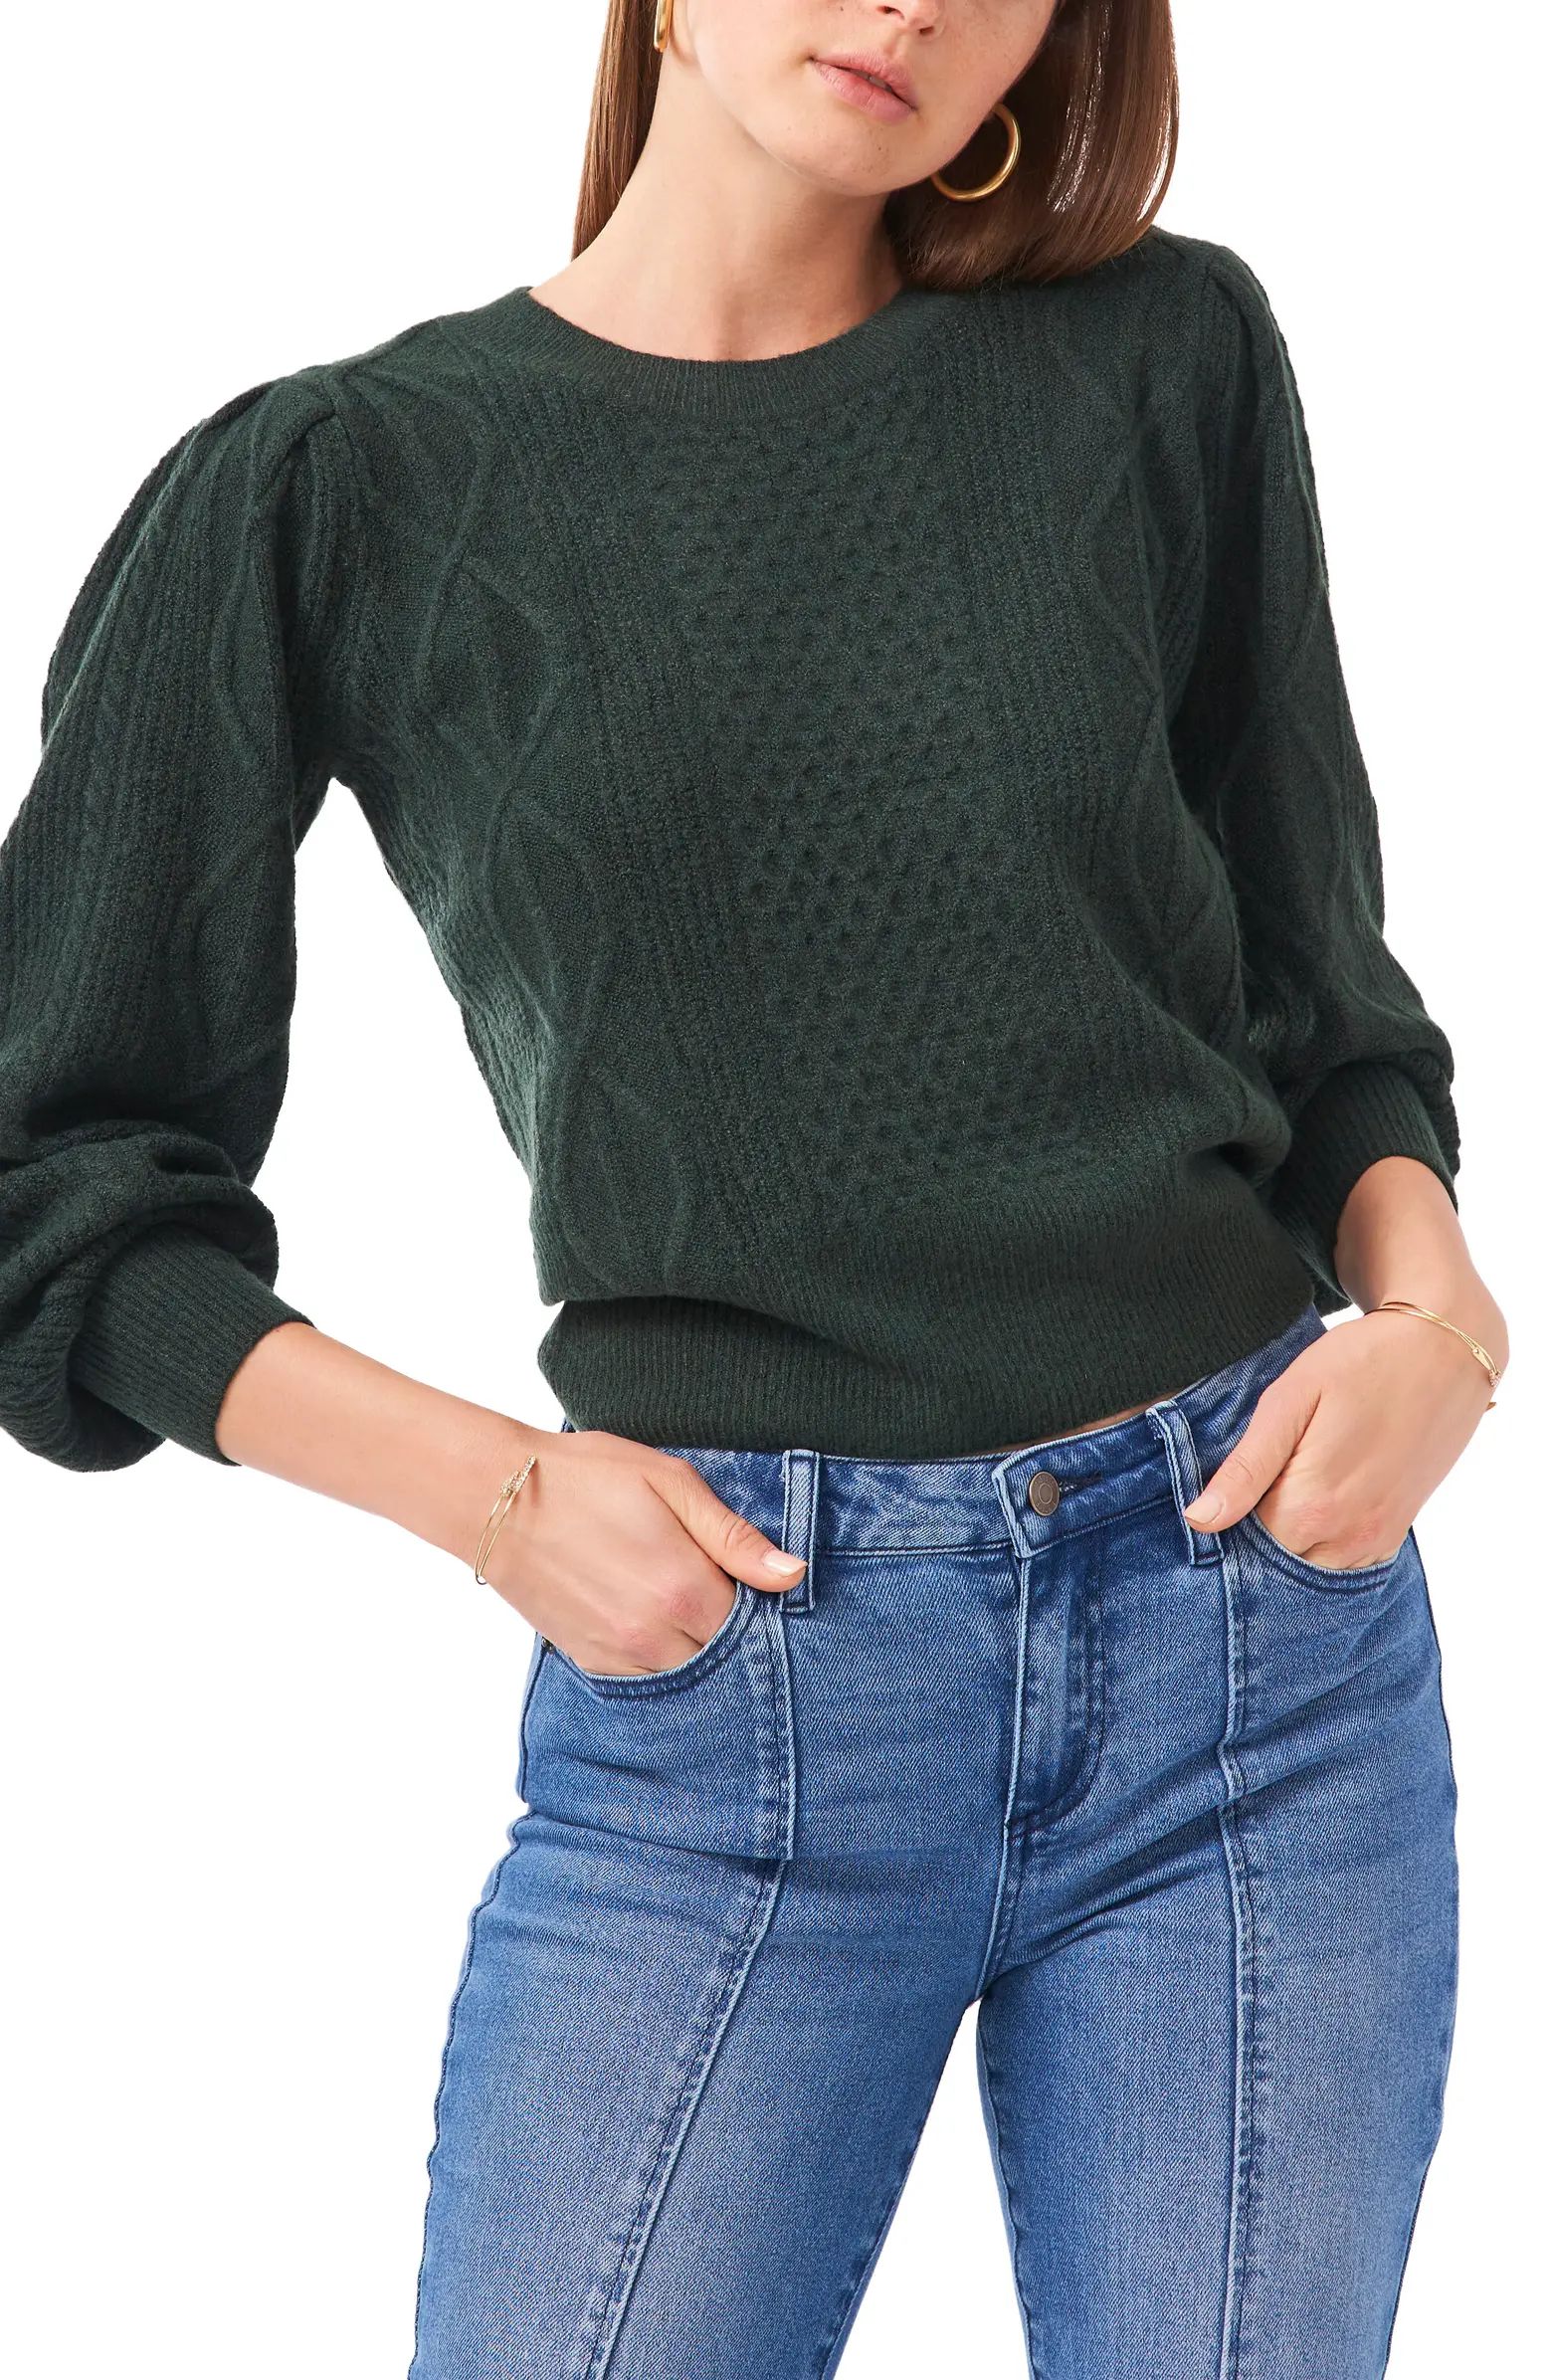 Variegated Cables Crew Sweater | Nordstrom